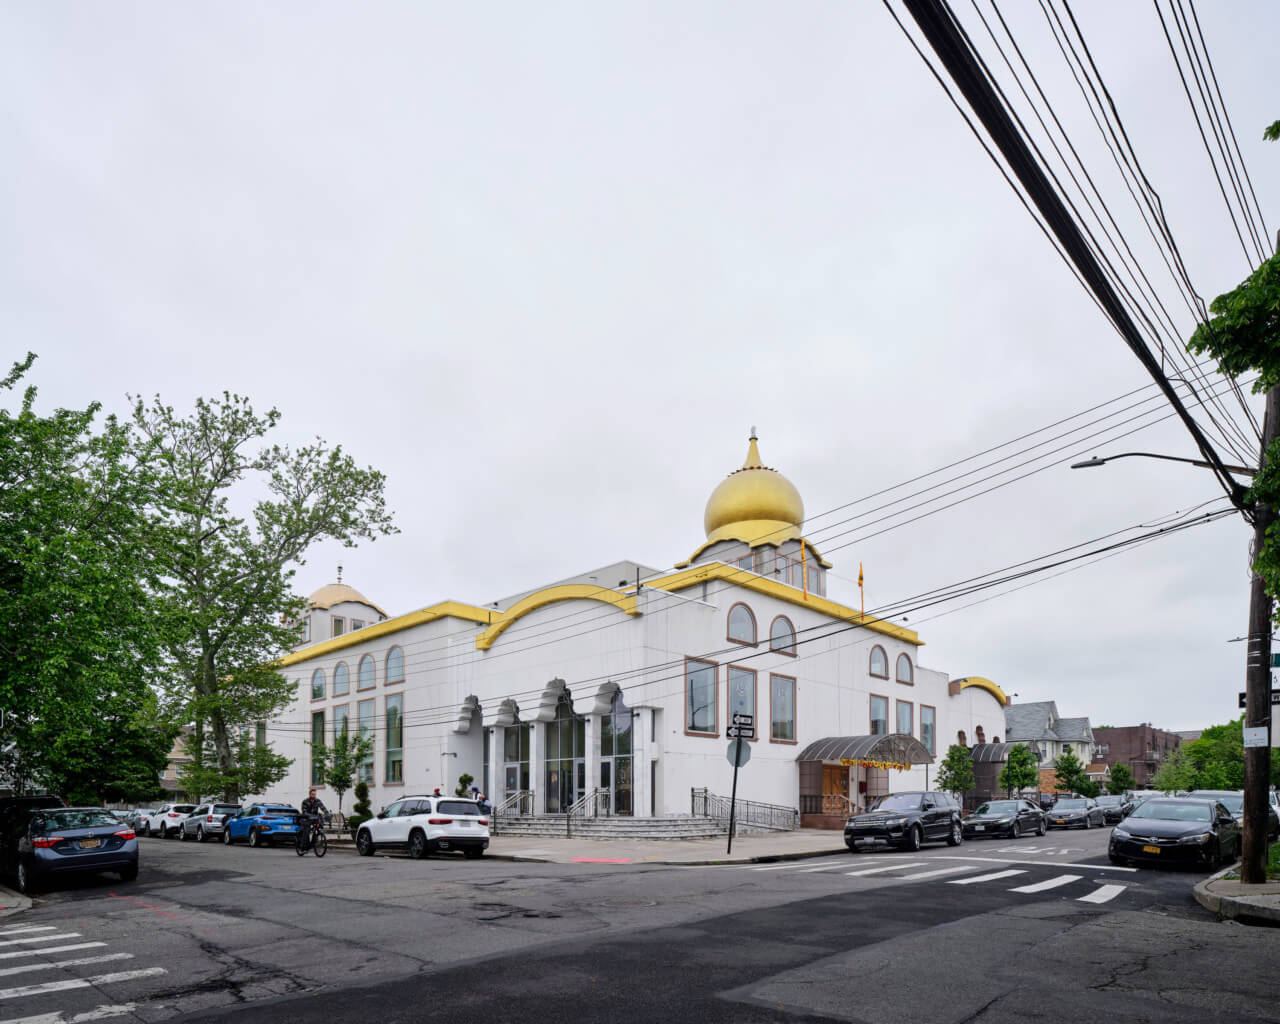 exterior of a sikh gurdwara in nyc